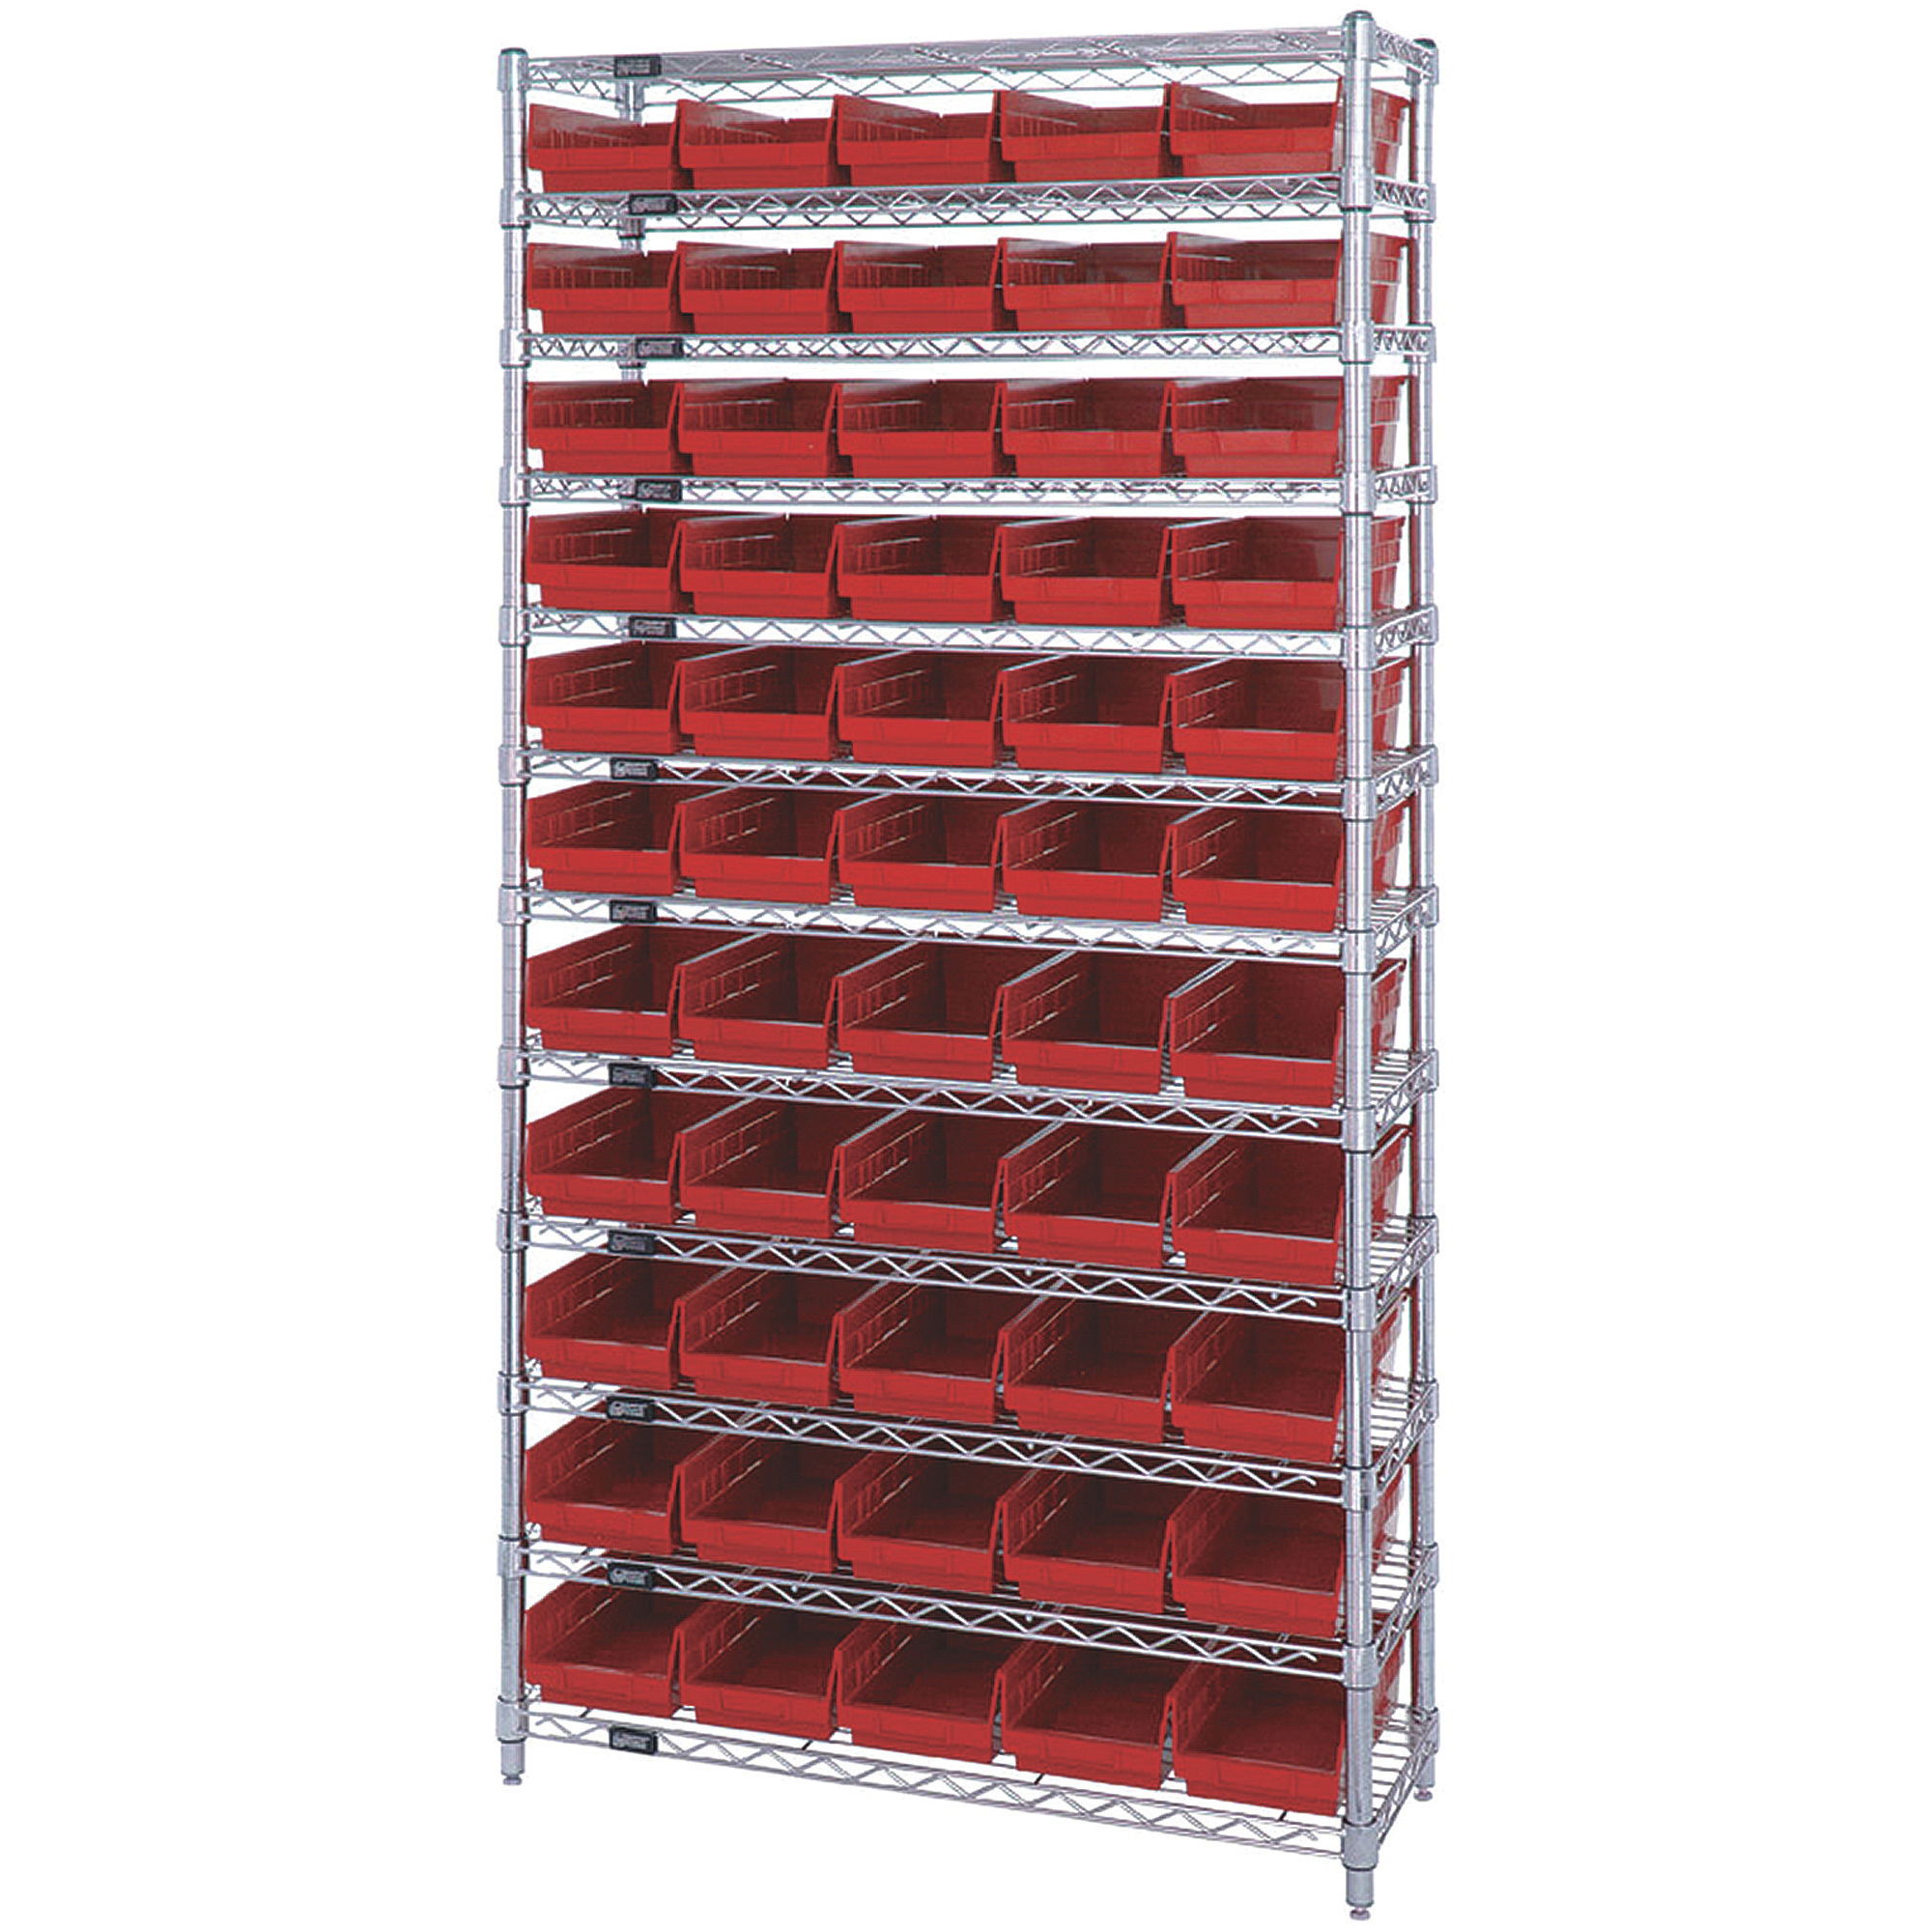 Quantum Storage Single Side Wire Chrome Shelving Unit with 55 Bins, 36Inch W x 12Inch D x 74Inch H, Red, Model WR12-102RD